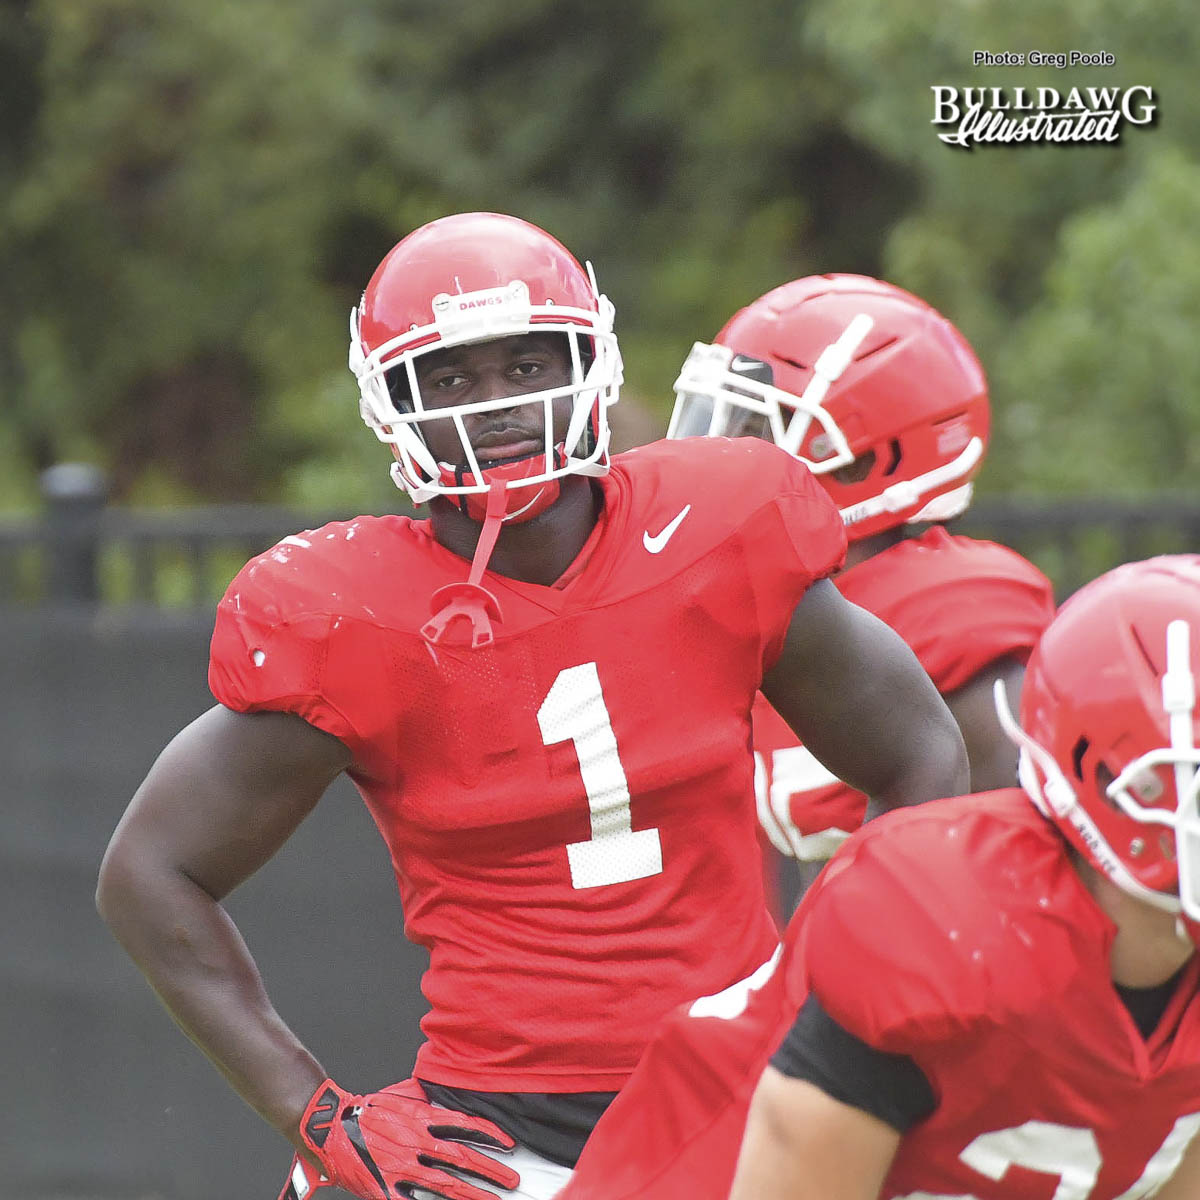 Sony Michel (1) - UGA Fall Camp - Practice No. 16 - Thursday, August 17, 2017